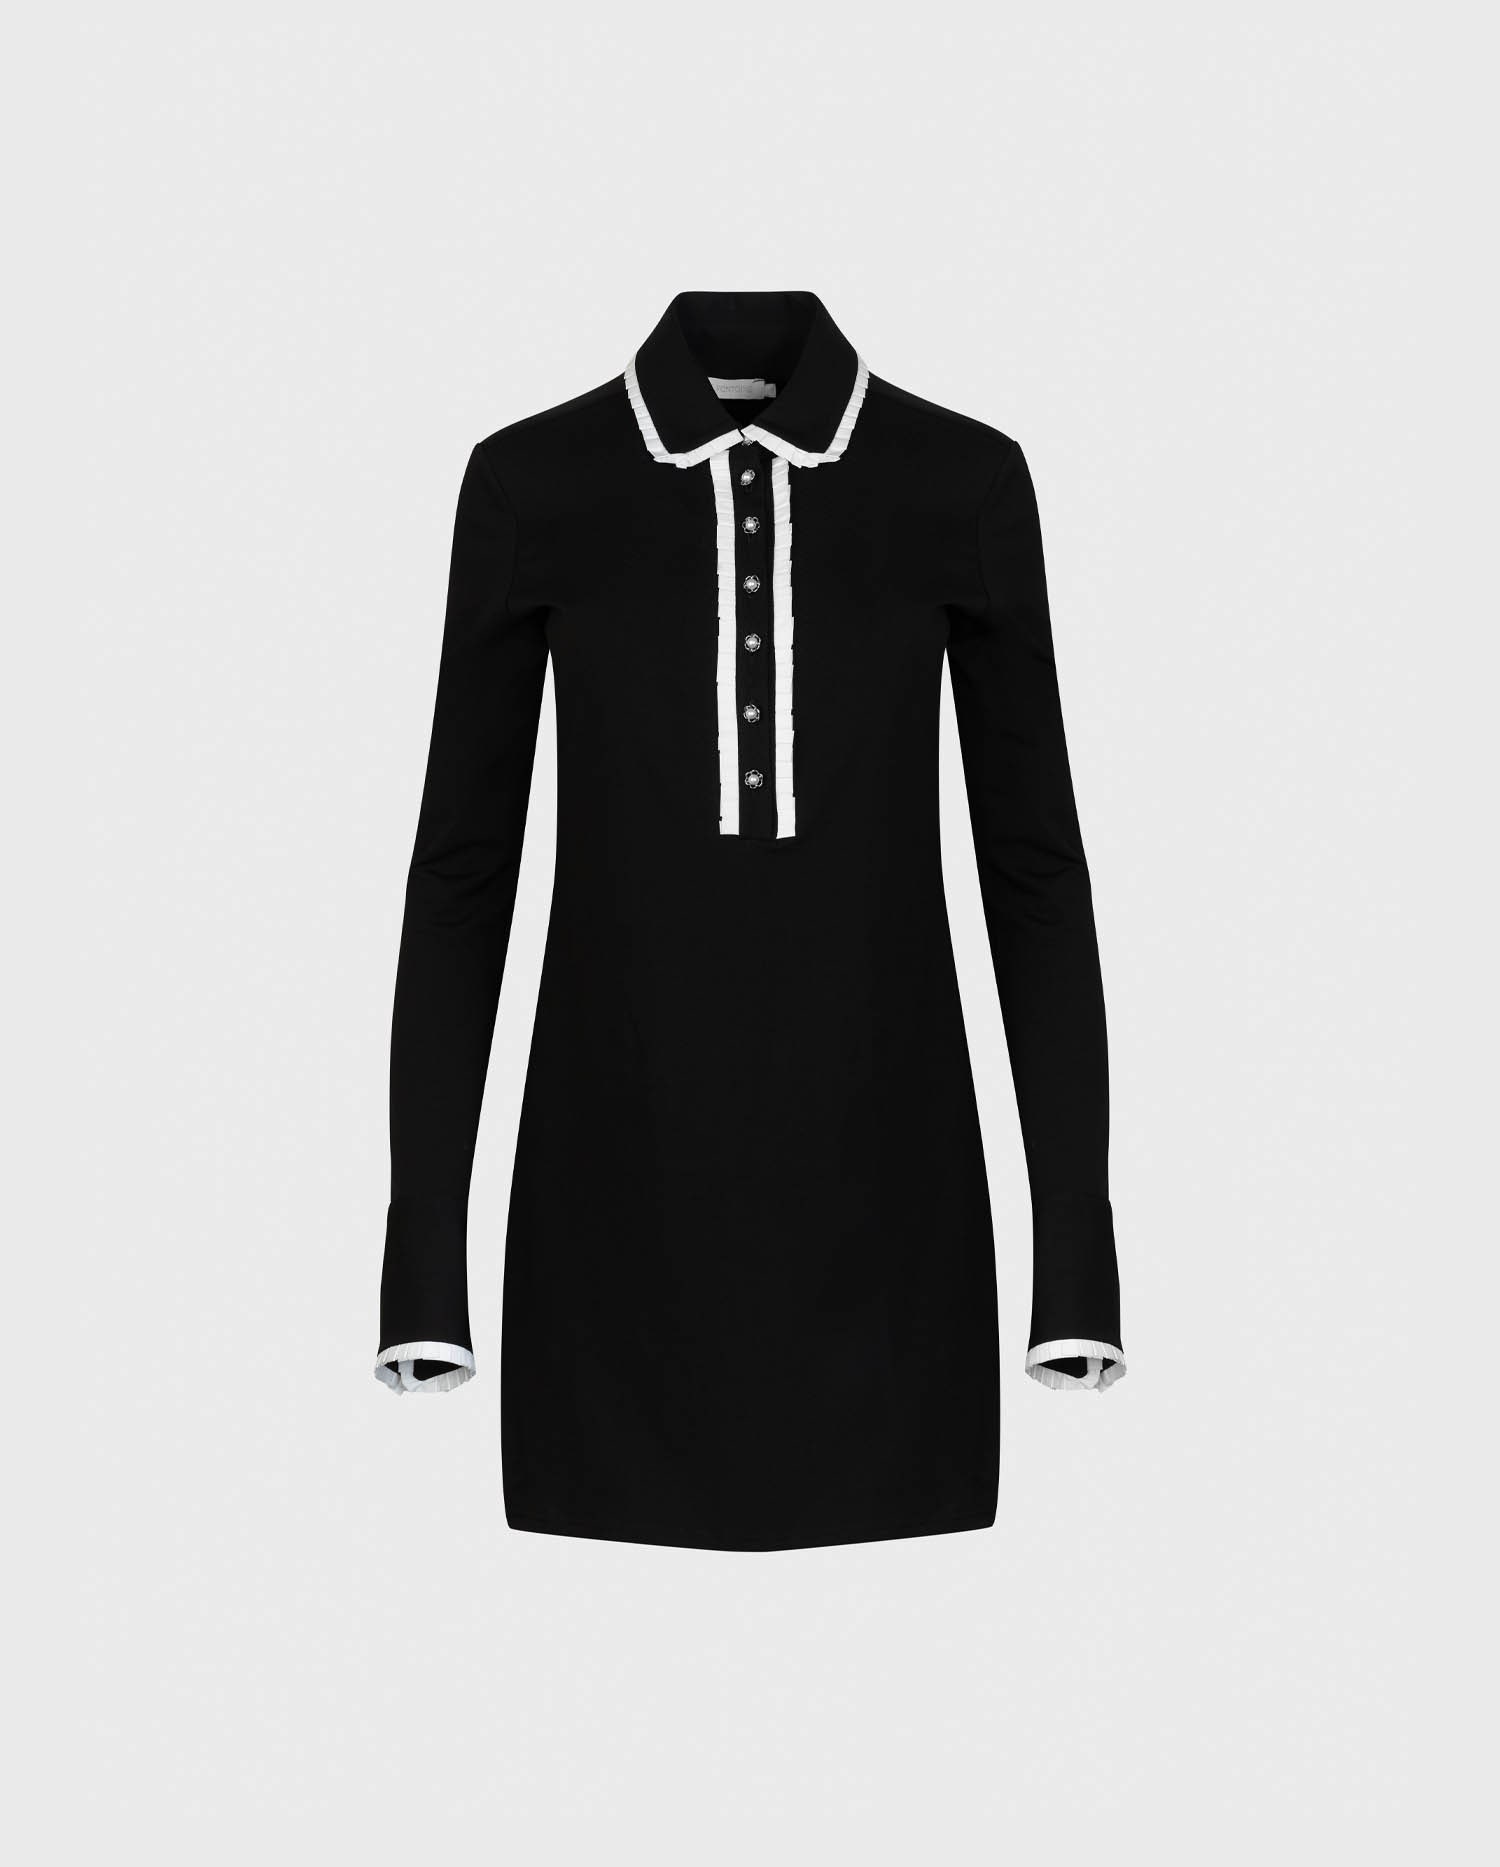 Discover the ESTAMPE Black Long sleeve dress featuring classic collar and half-placket with pleated trims from ANNE FONTAINE